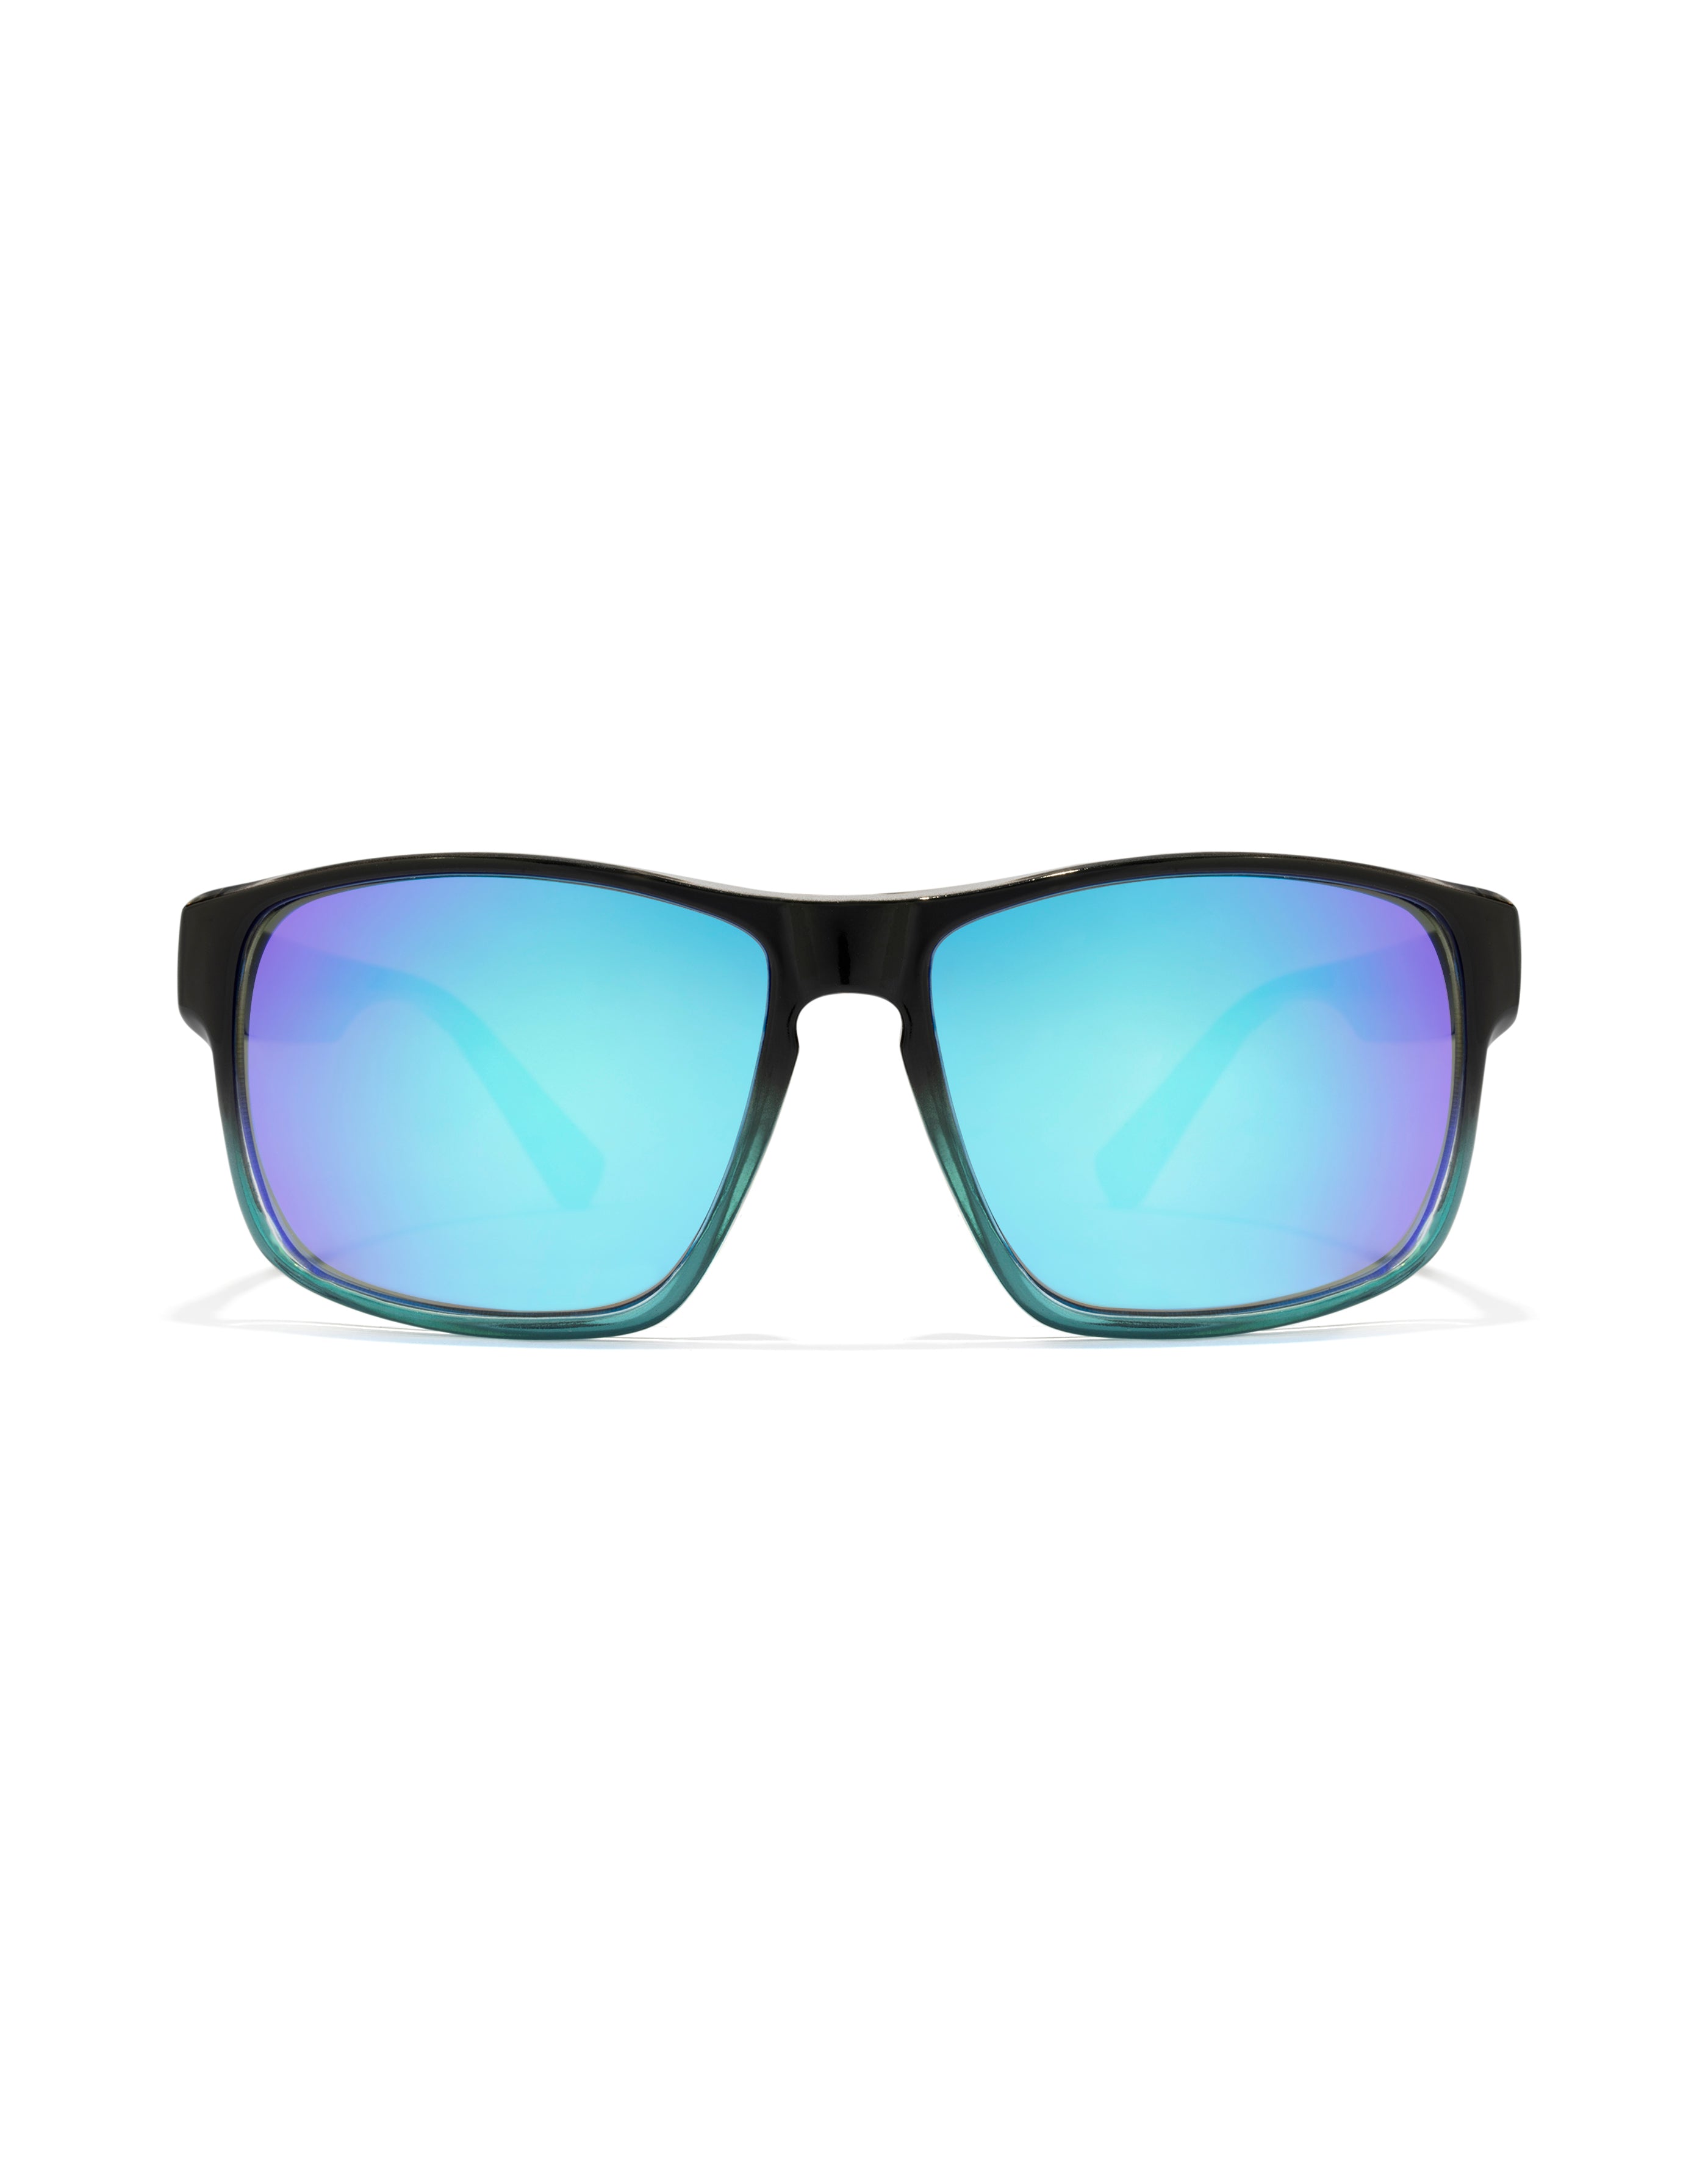 HAWKERS - FASTER Fusion Clear Blue For Men and Women UV400